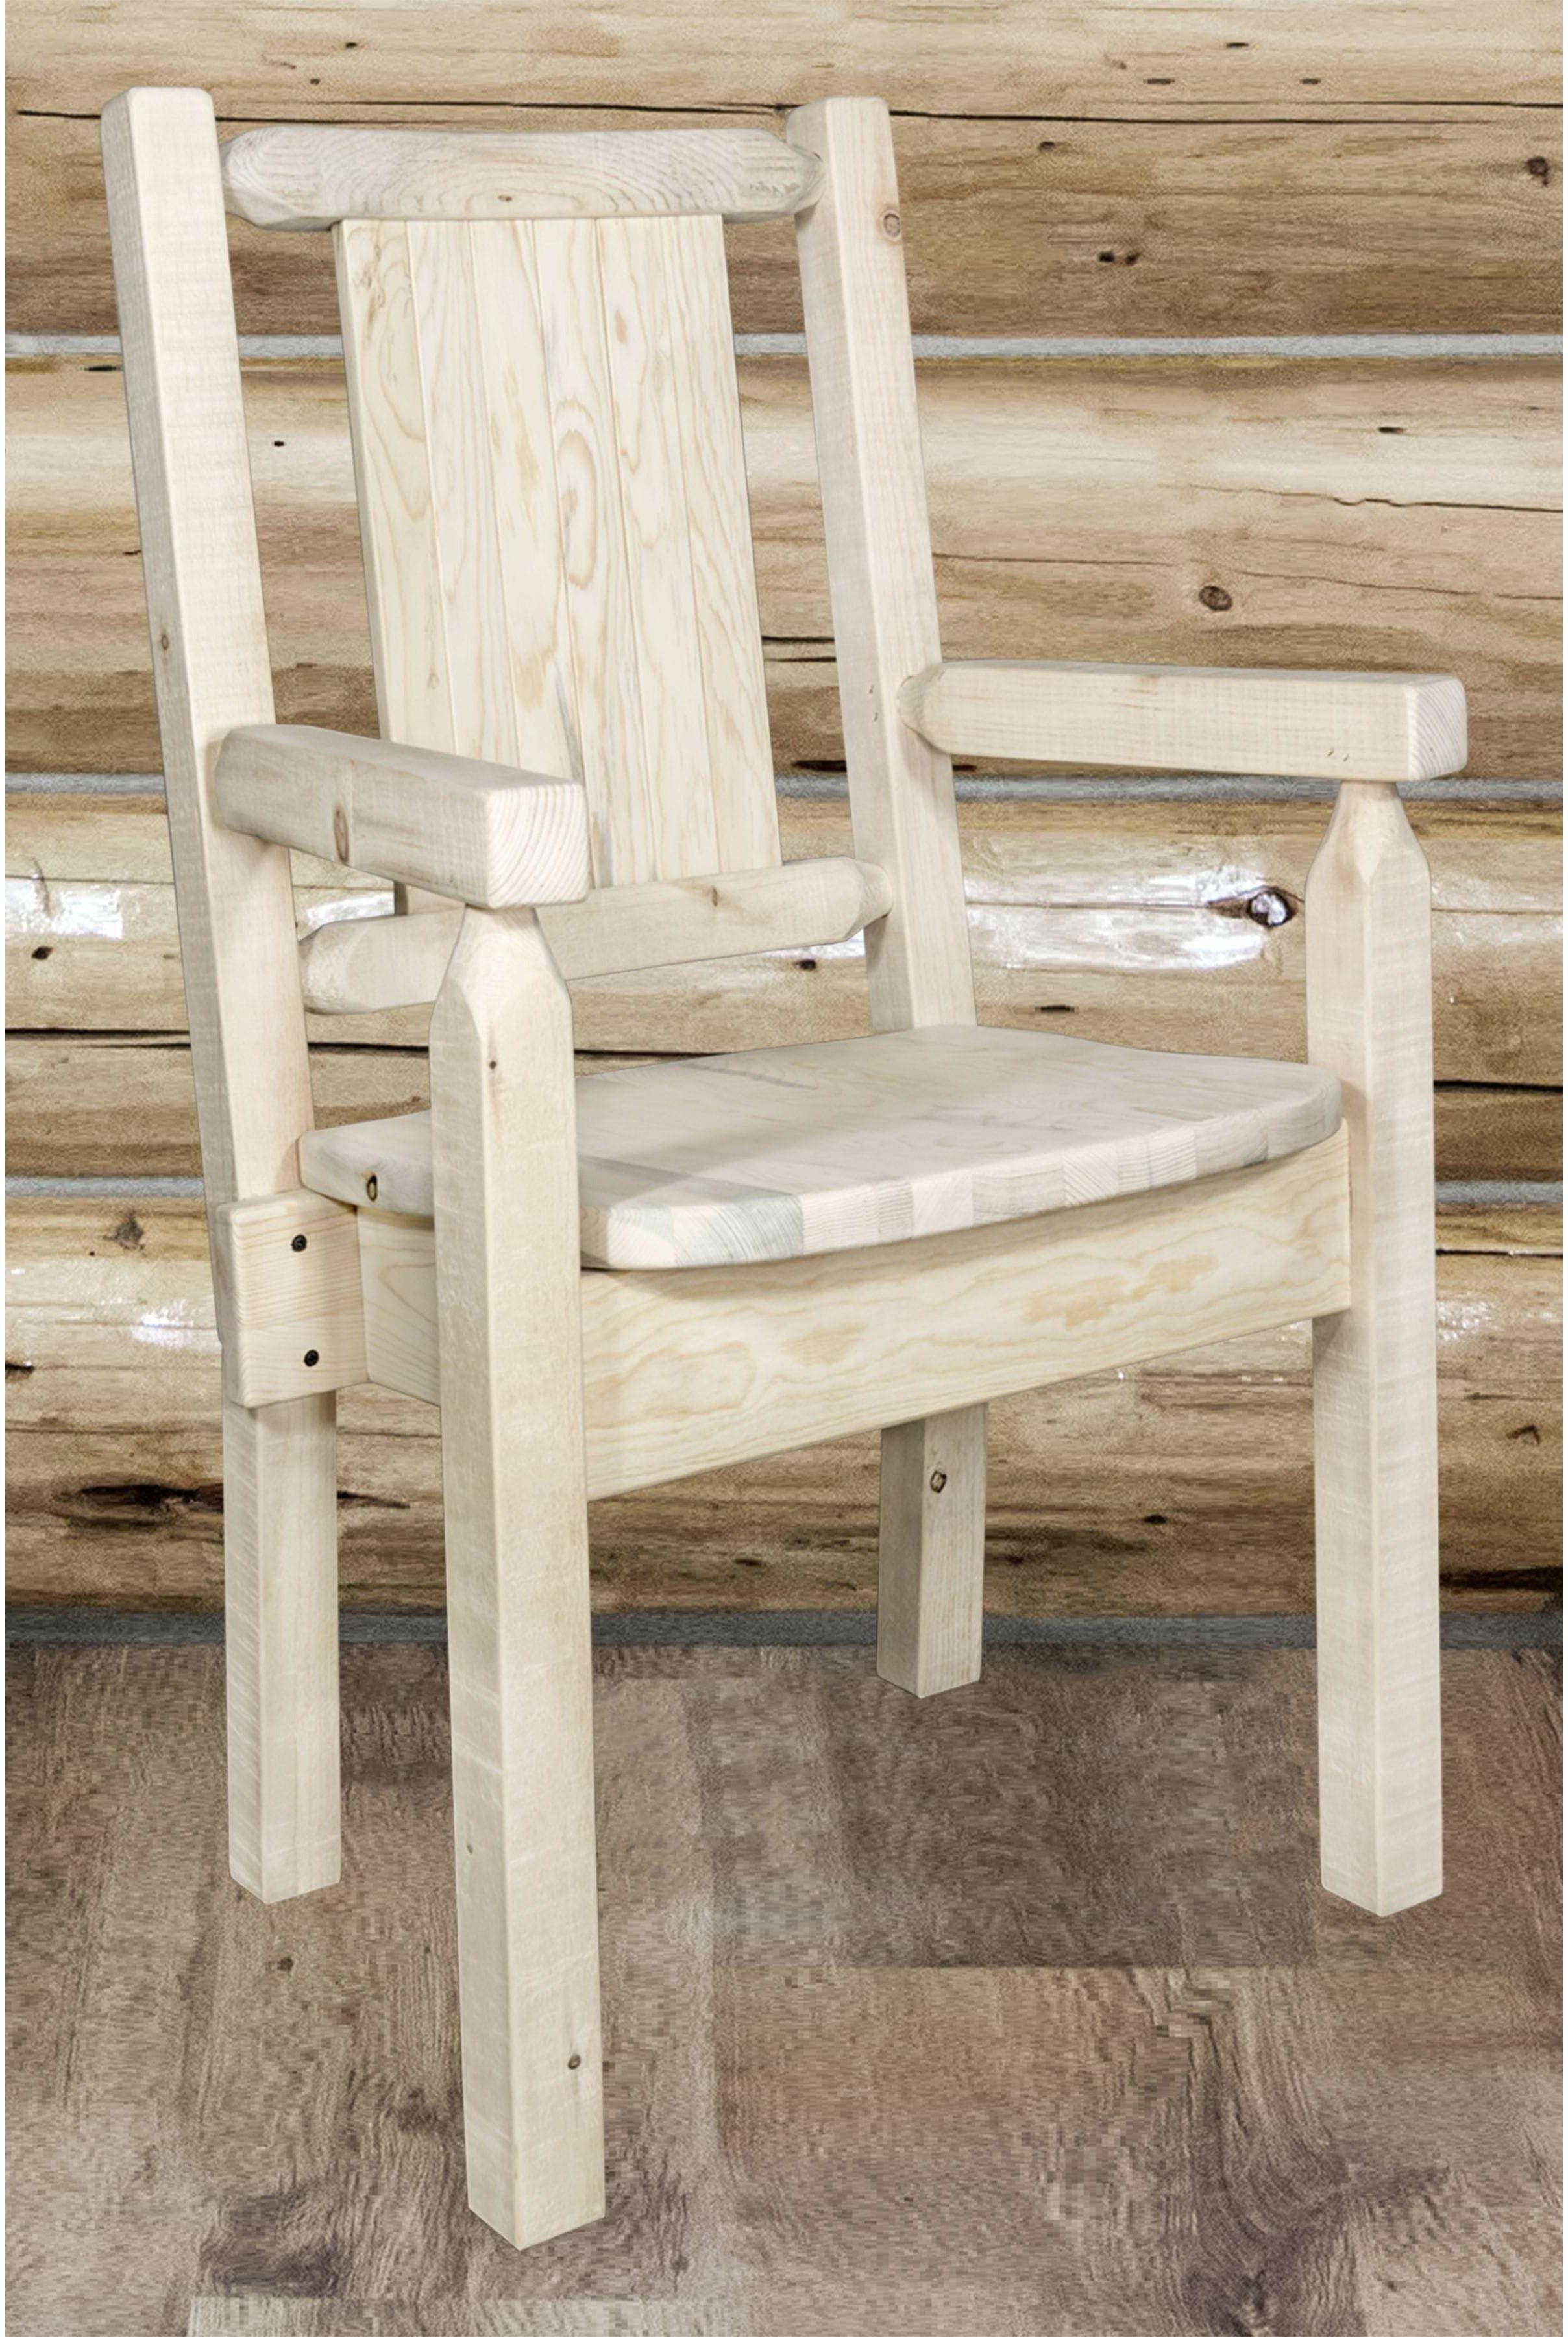 Montana Woodworks Homestead Collection Captain's Chair with Laser Engraved Design - Clear Lacquer Finish-Rustic Furniture Marketplace